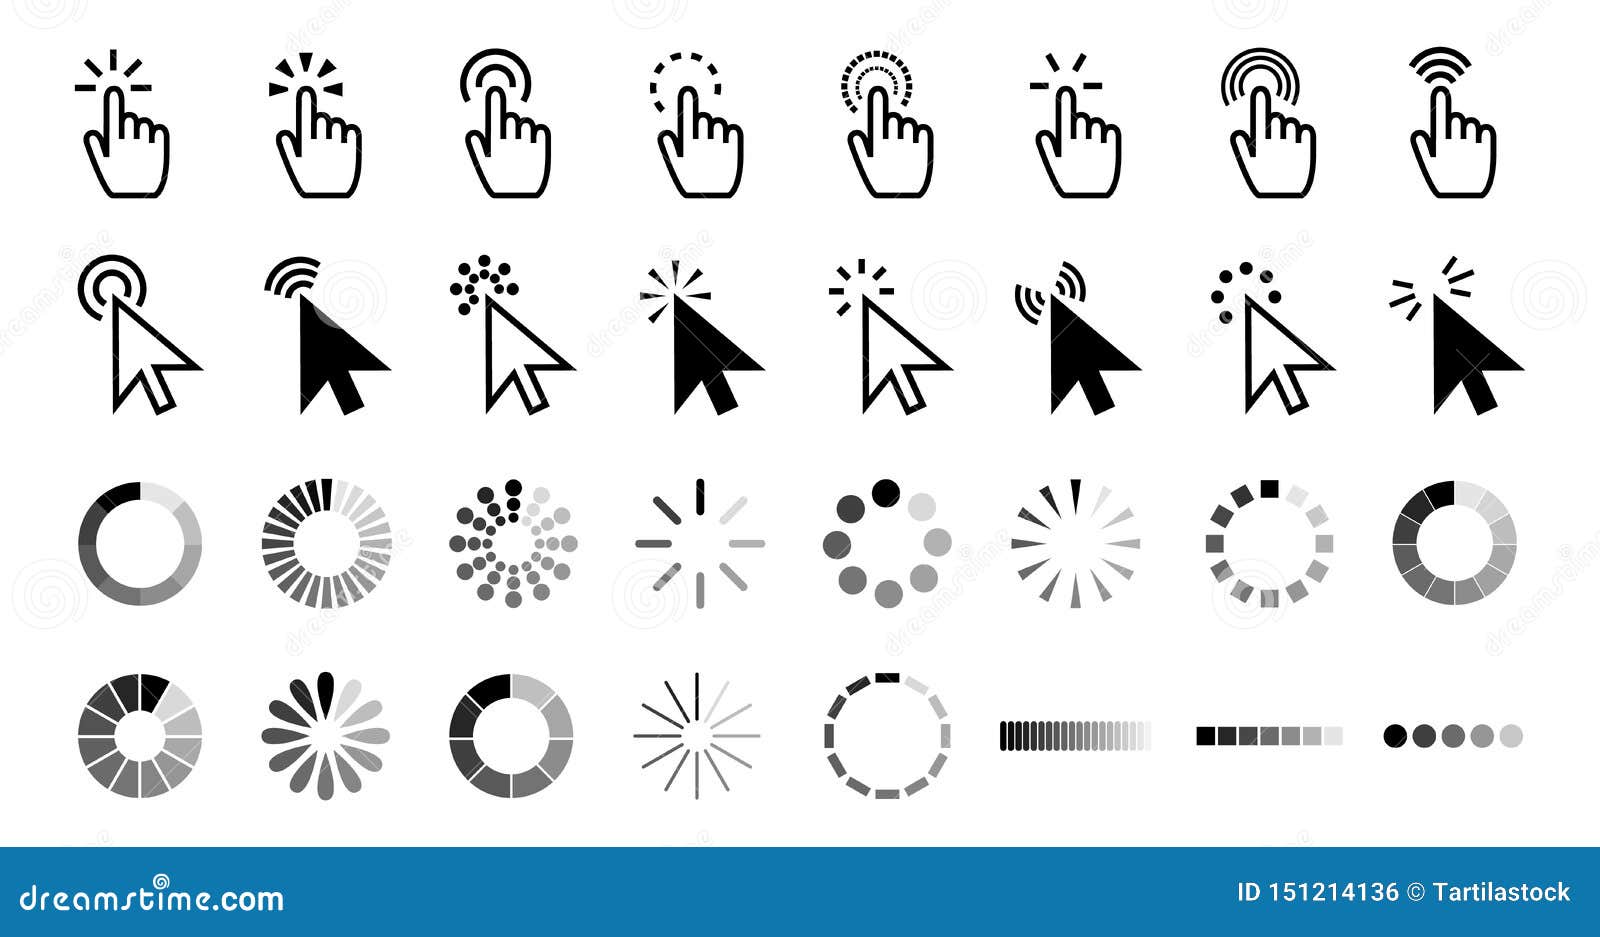 pointer click icon. clicking cursor, pointing hand clicks and waiting loading icons  collection